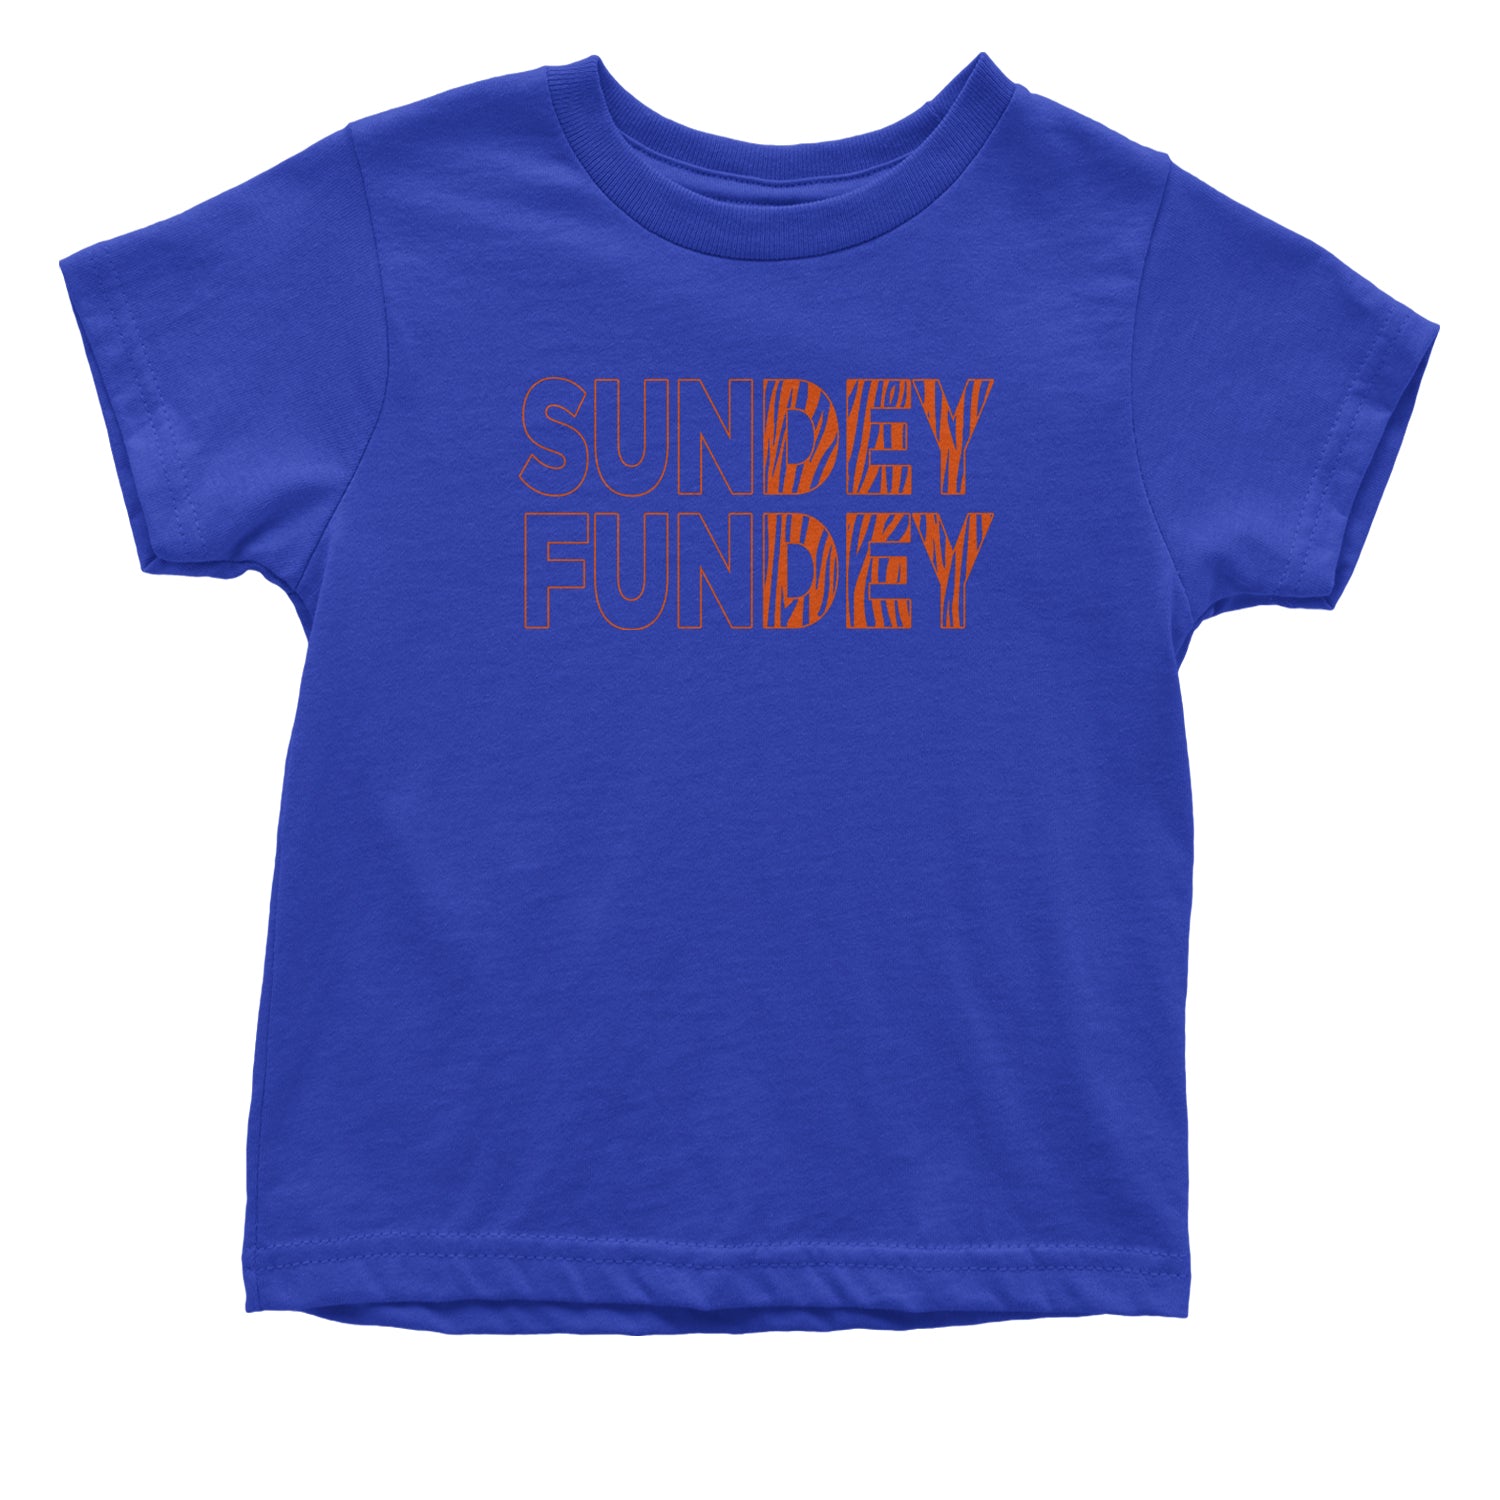 SunDEY FunDEY Sunday Funday Infant One-Piece Romper Bodysuit and Toddler T-shirt ball, burrow, dey, foot, football, joe, ohio, sports, who by Expression Tees